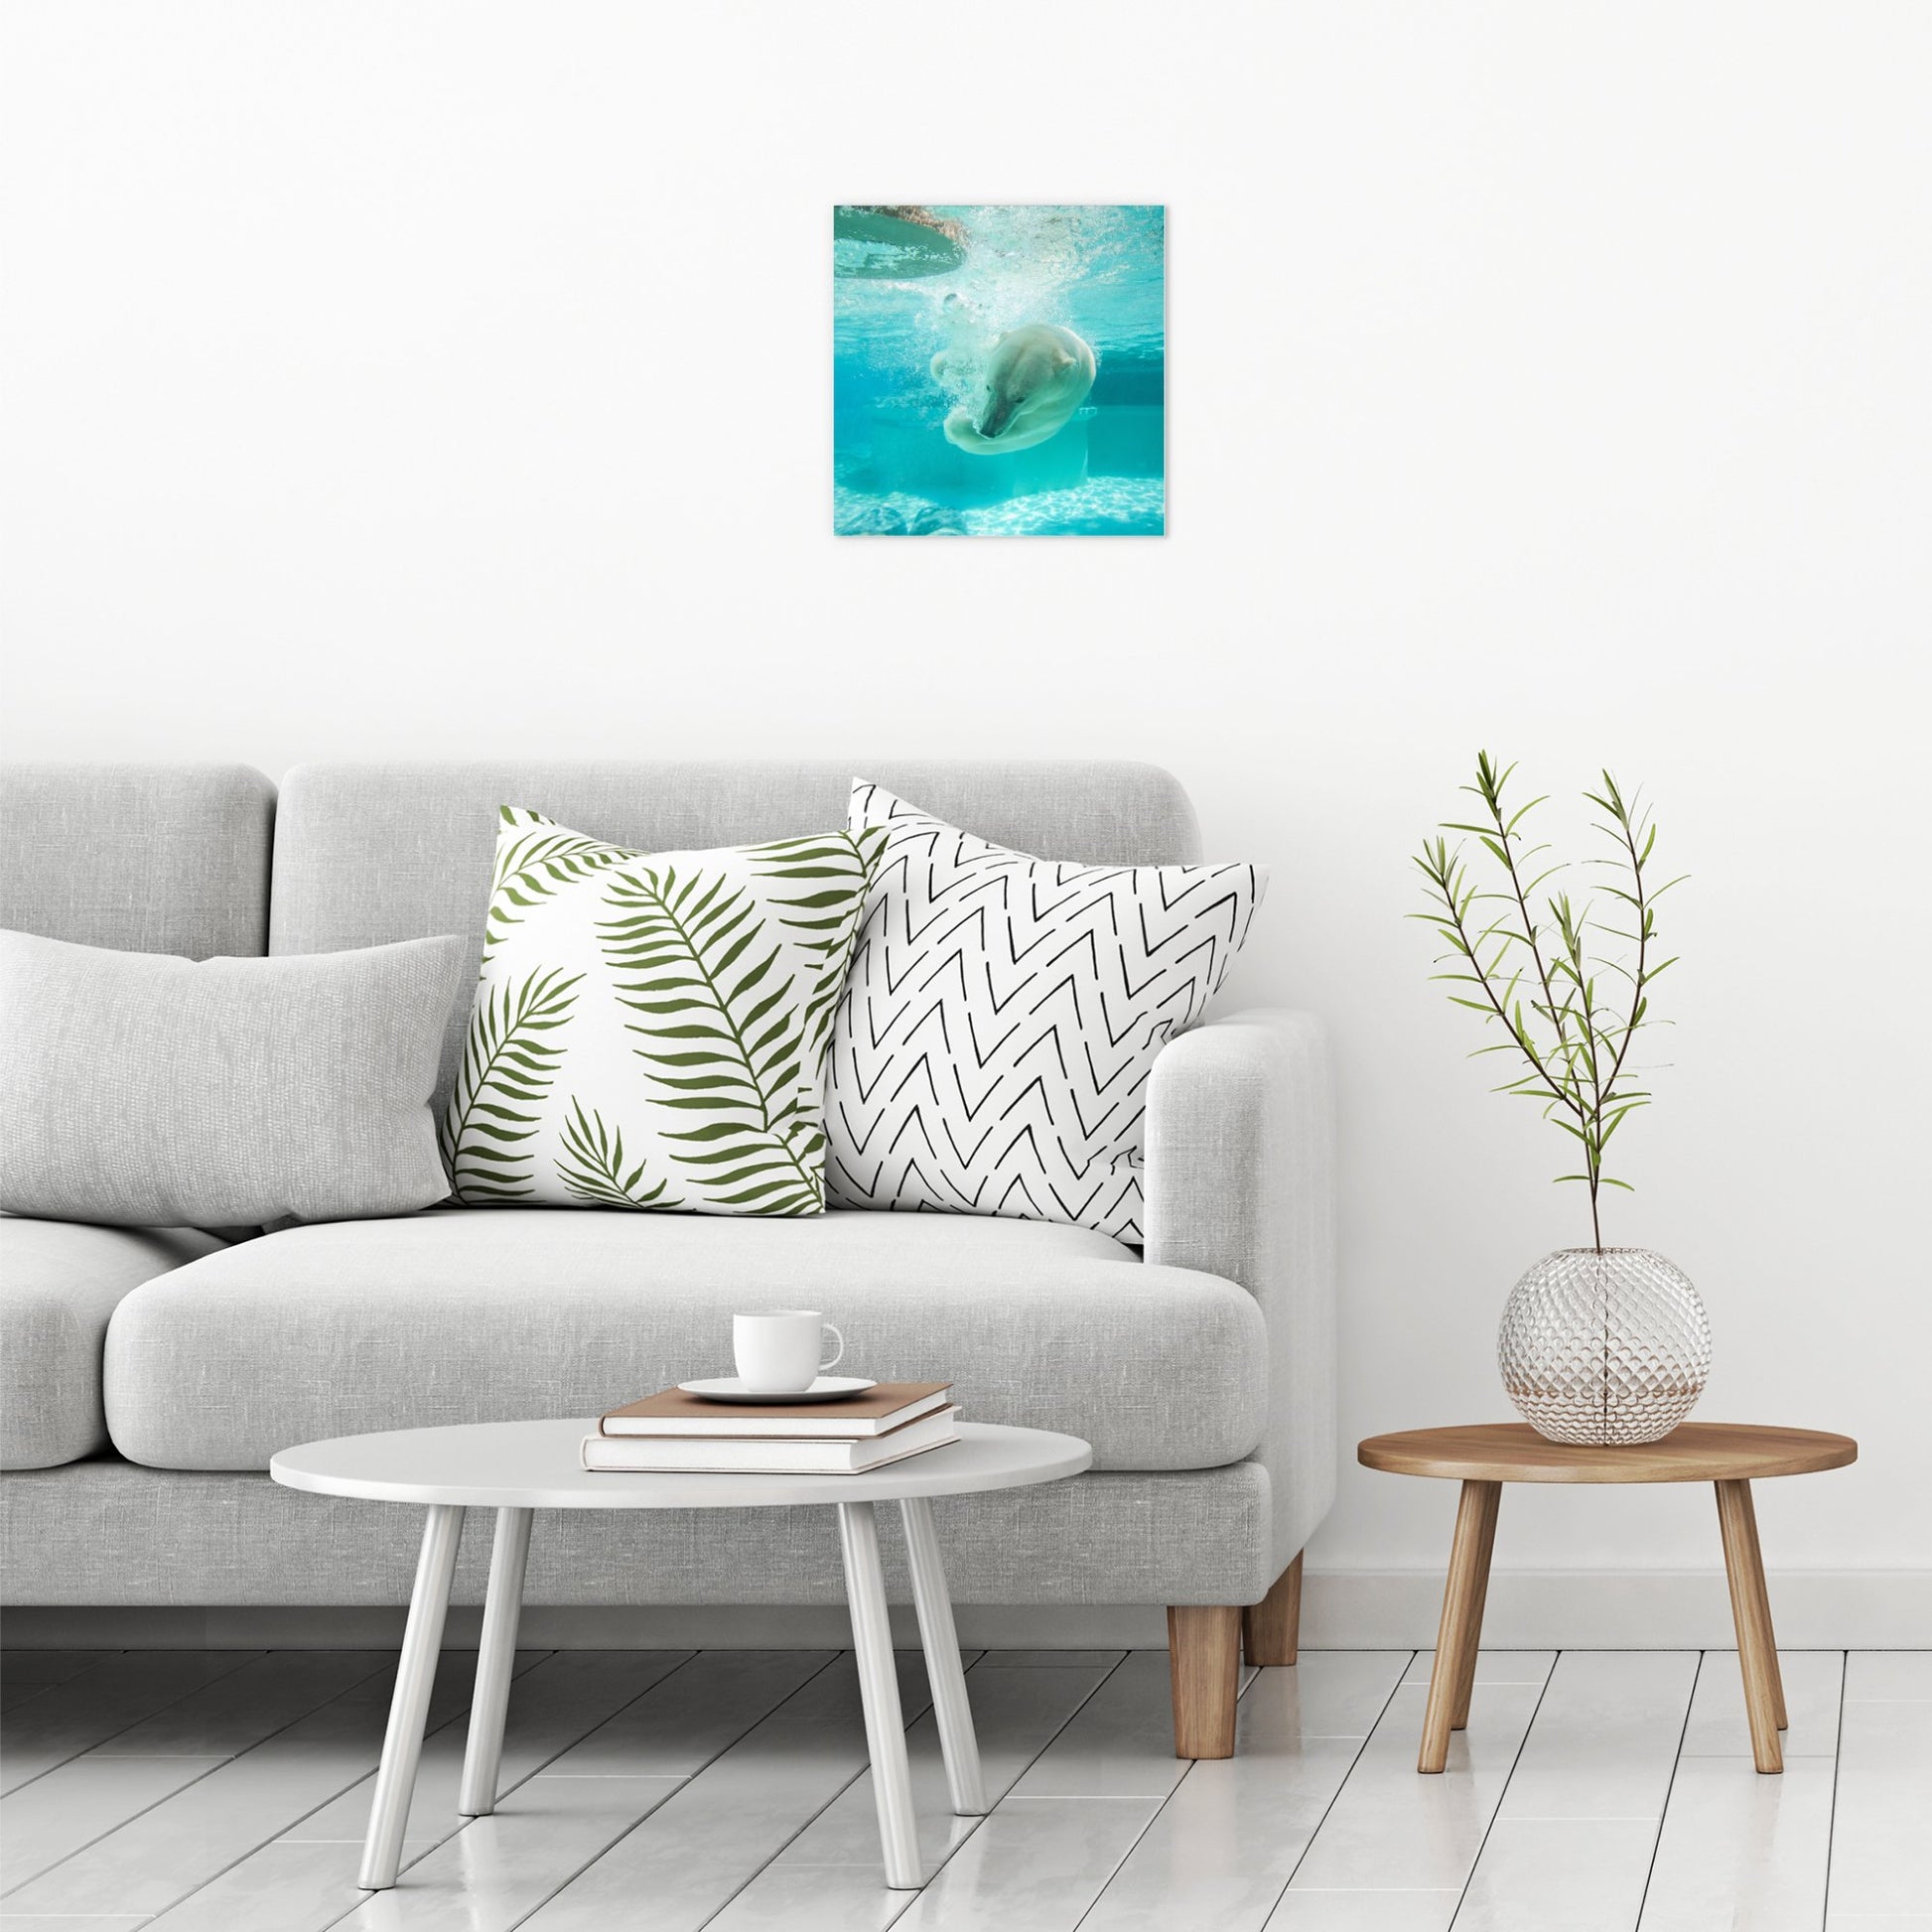 A contemporary modern room view showing a medium size metal art poster display plate with printed design of a Polar Bear Under Water